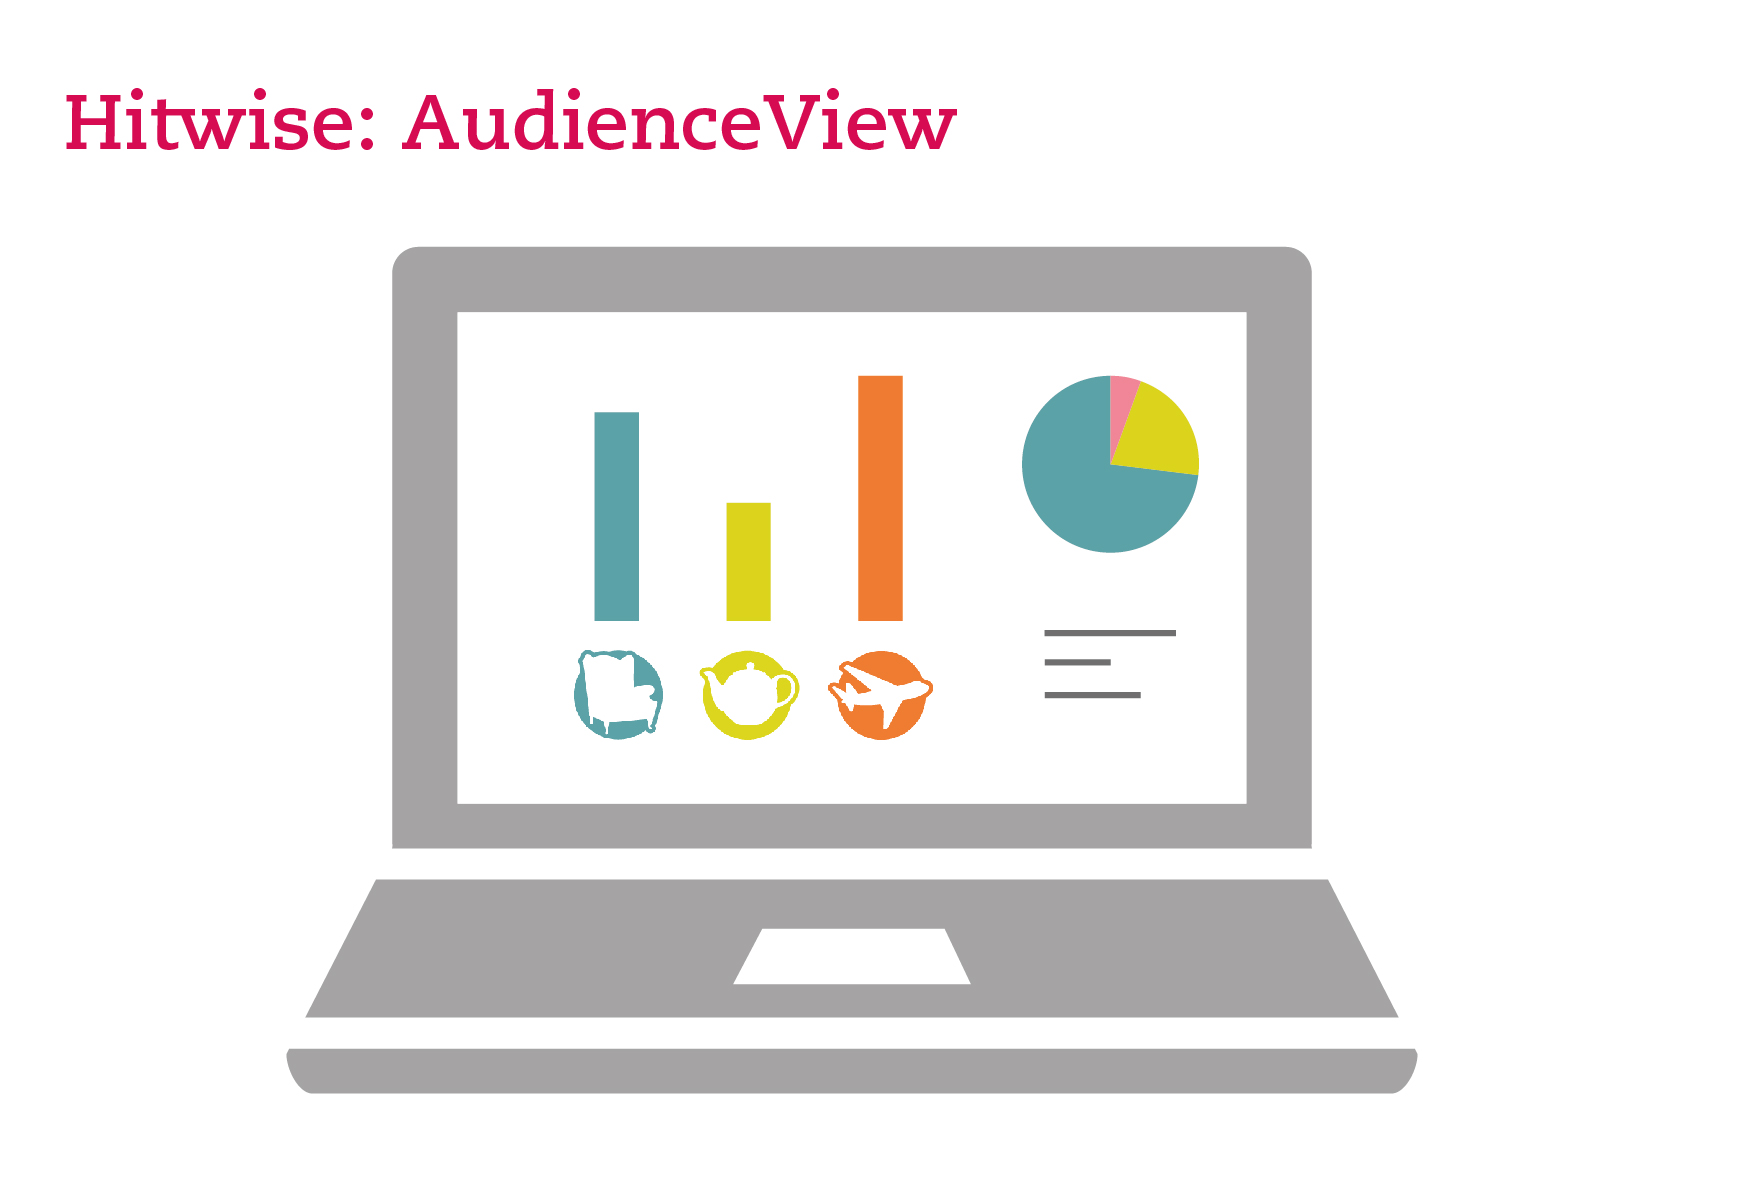 Hitwise:AudienceView is a powerful tool that helps you to understand more about who your website audiences are and what they do online, so you can serve them better. Standard web analytics tools help you to understand how people interact with your website. Hitwise:AudienceView tells you about the types of people visiting your website.